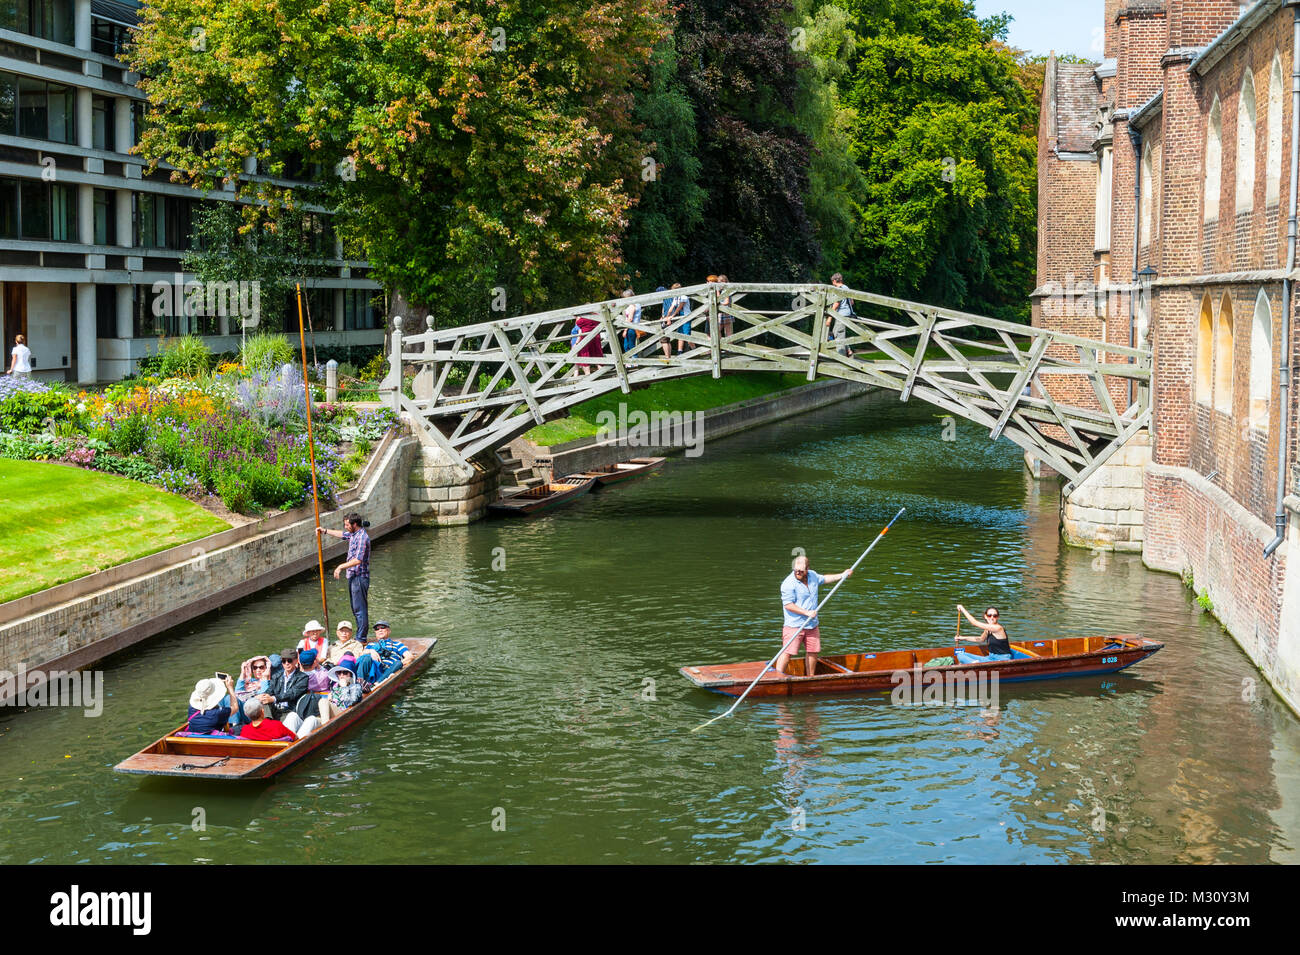 Cambridge, UK -August 2017. The Mathematical Bridge also known as wooden bridge at Queens' College, Cambridge, UK with the River Cam passing through Stock Photo